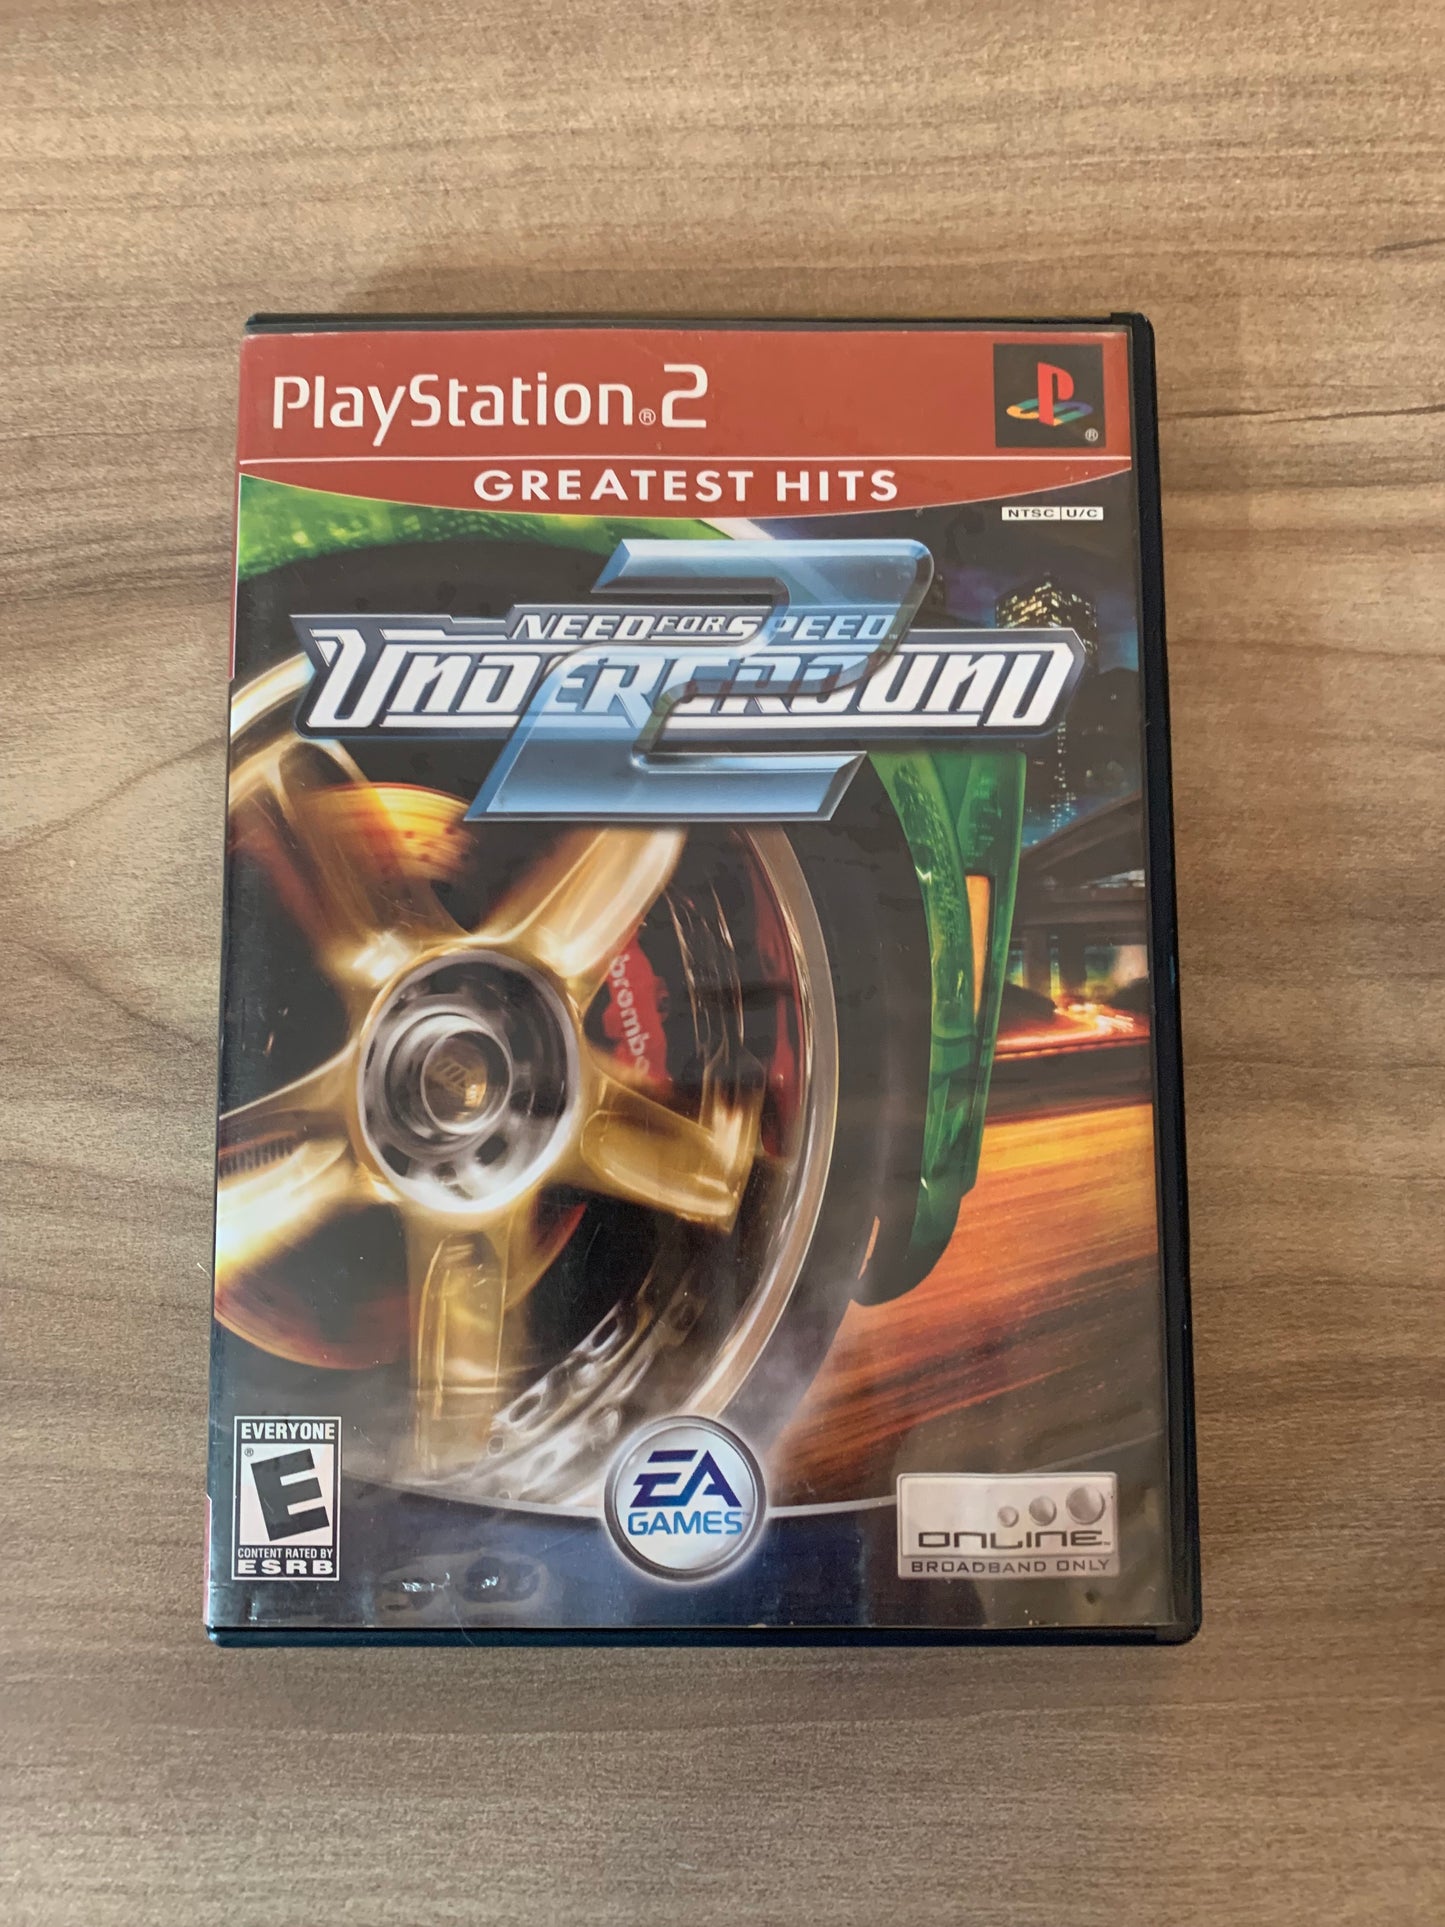 SONY PLAYSTATiON 2 [PS2] | NEED FOR SPEED UNDERGROUND 2 | GREATEST HiTS